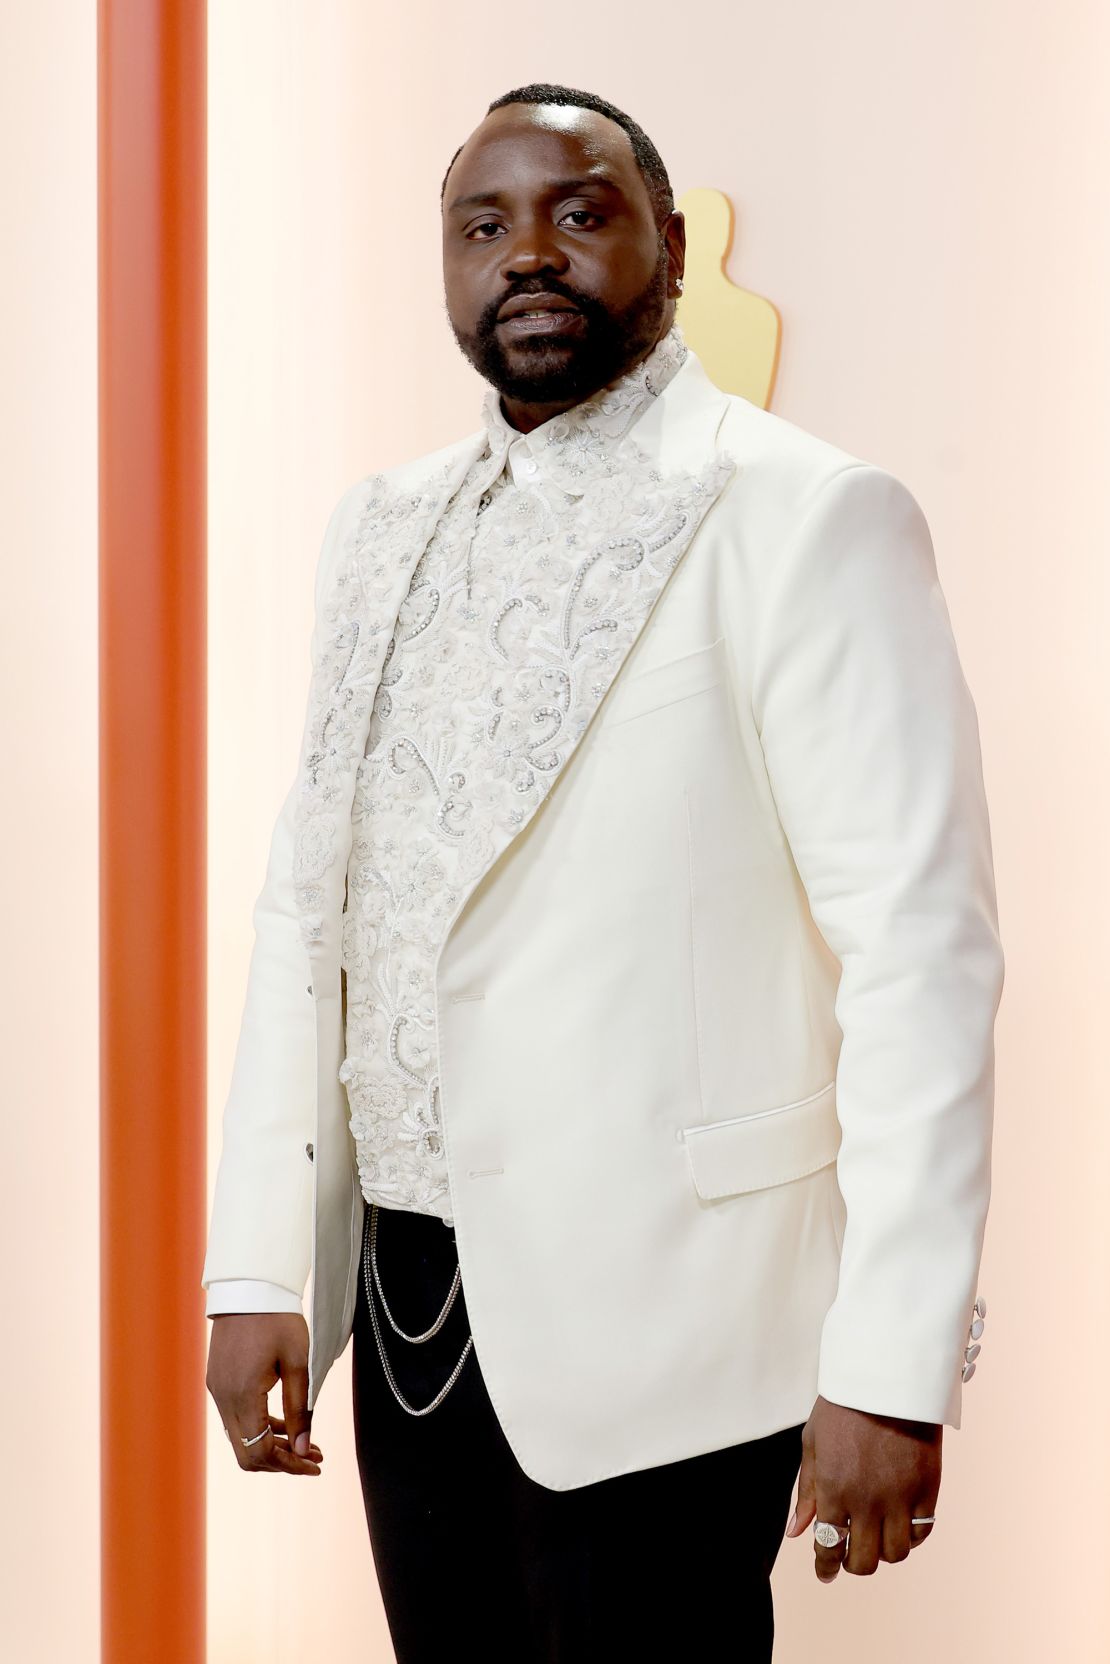 Brian Tyree Henry, nominated for Best Supporting Actor, wore a white double-breasted Dolce & Gabbana jacket with floral embellishments. 